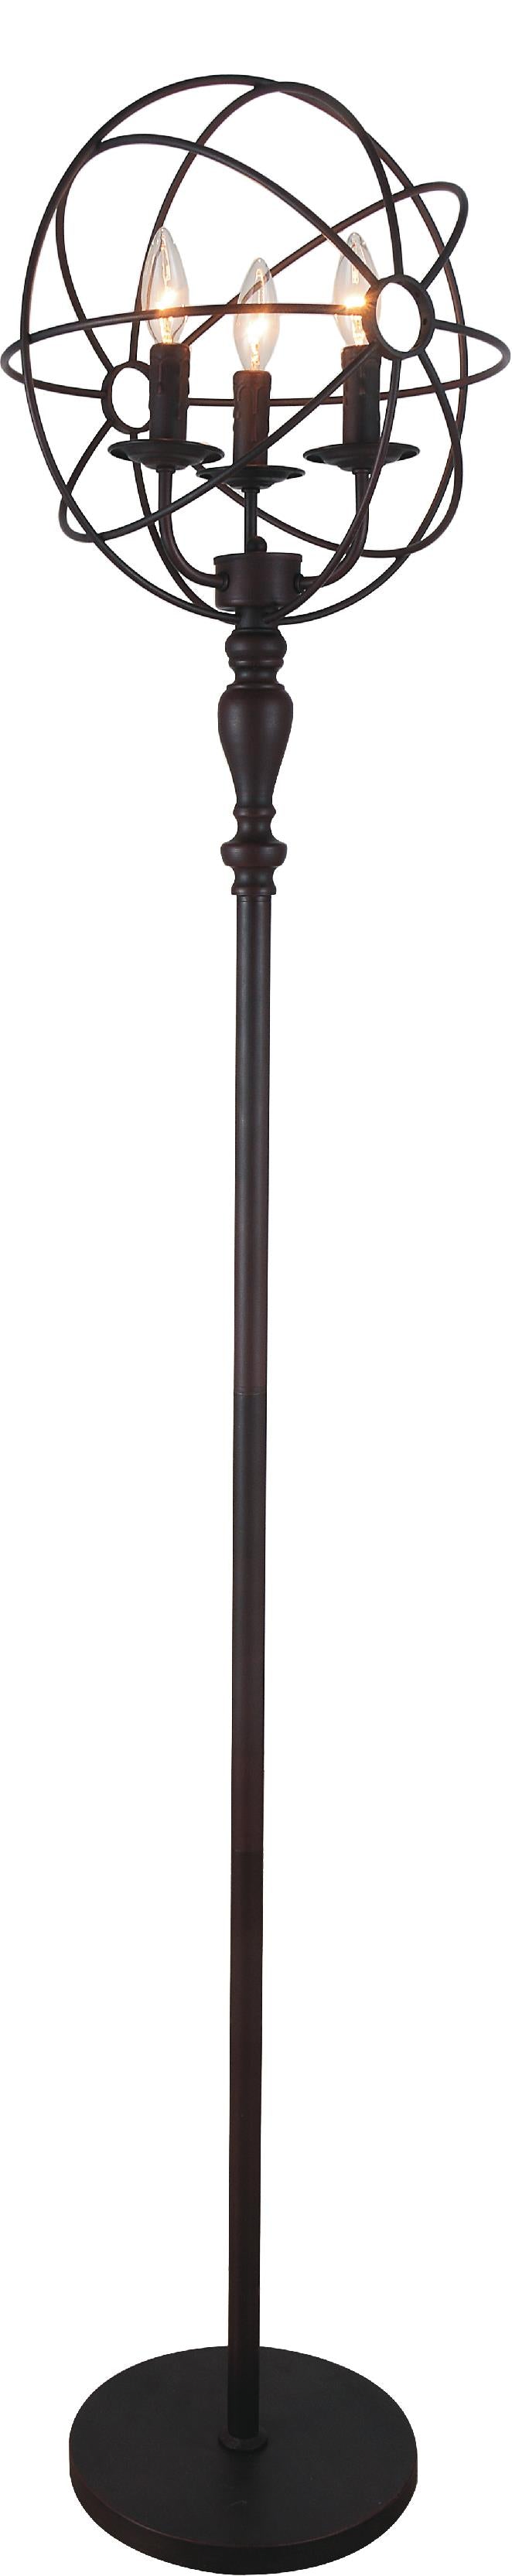 3 Light Floor Lamp with Brown finish